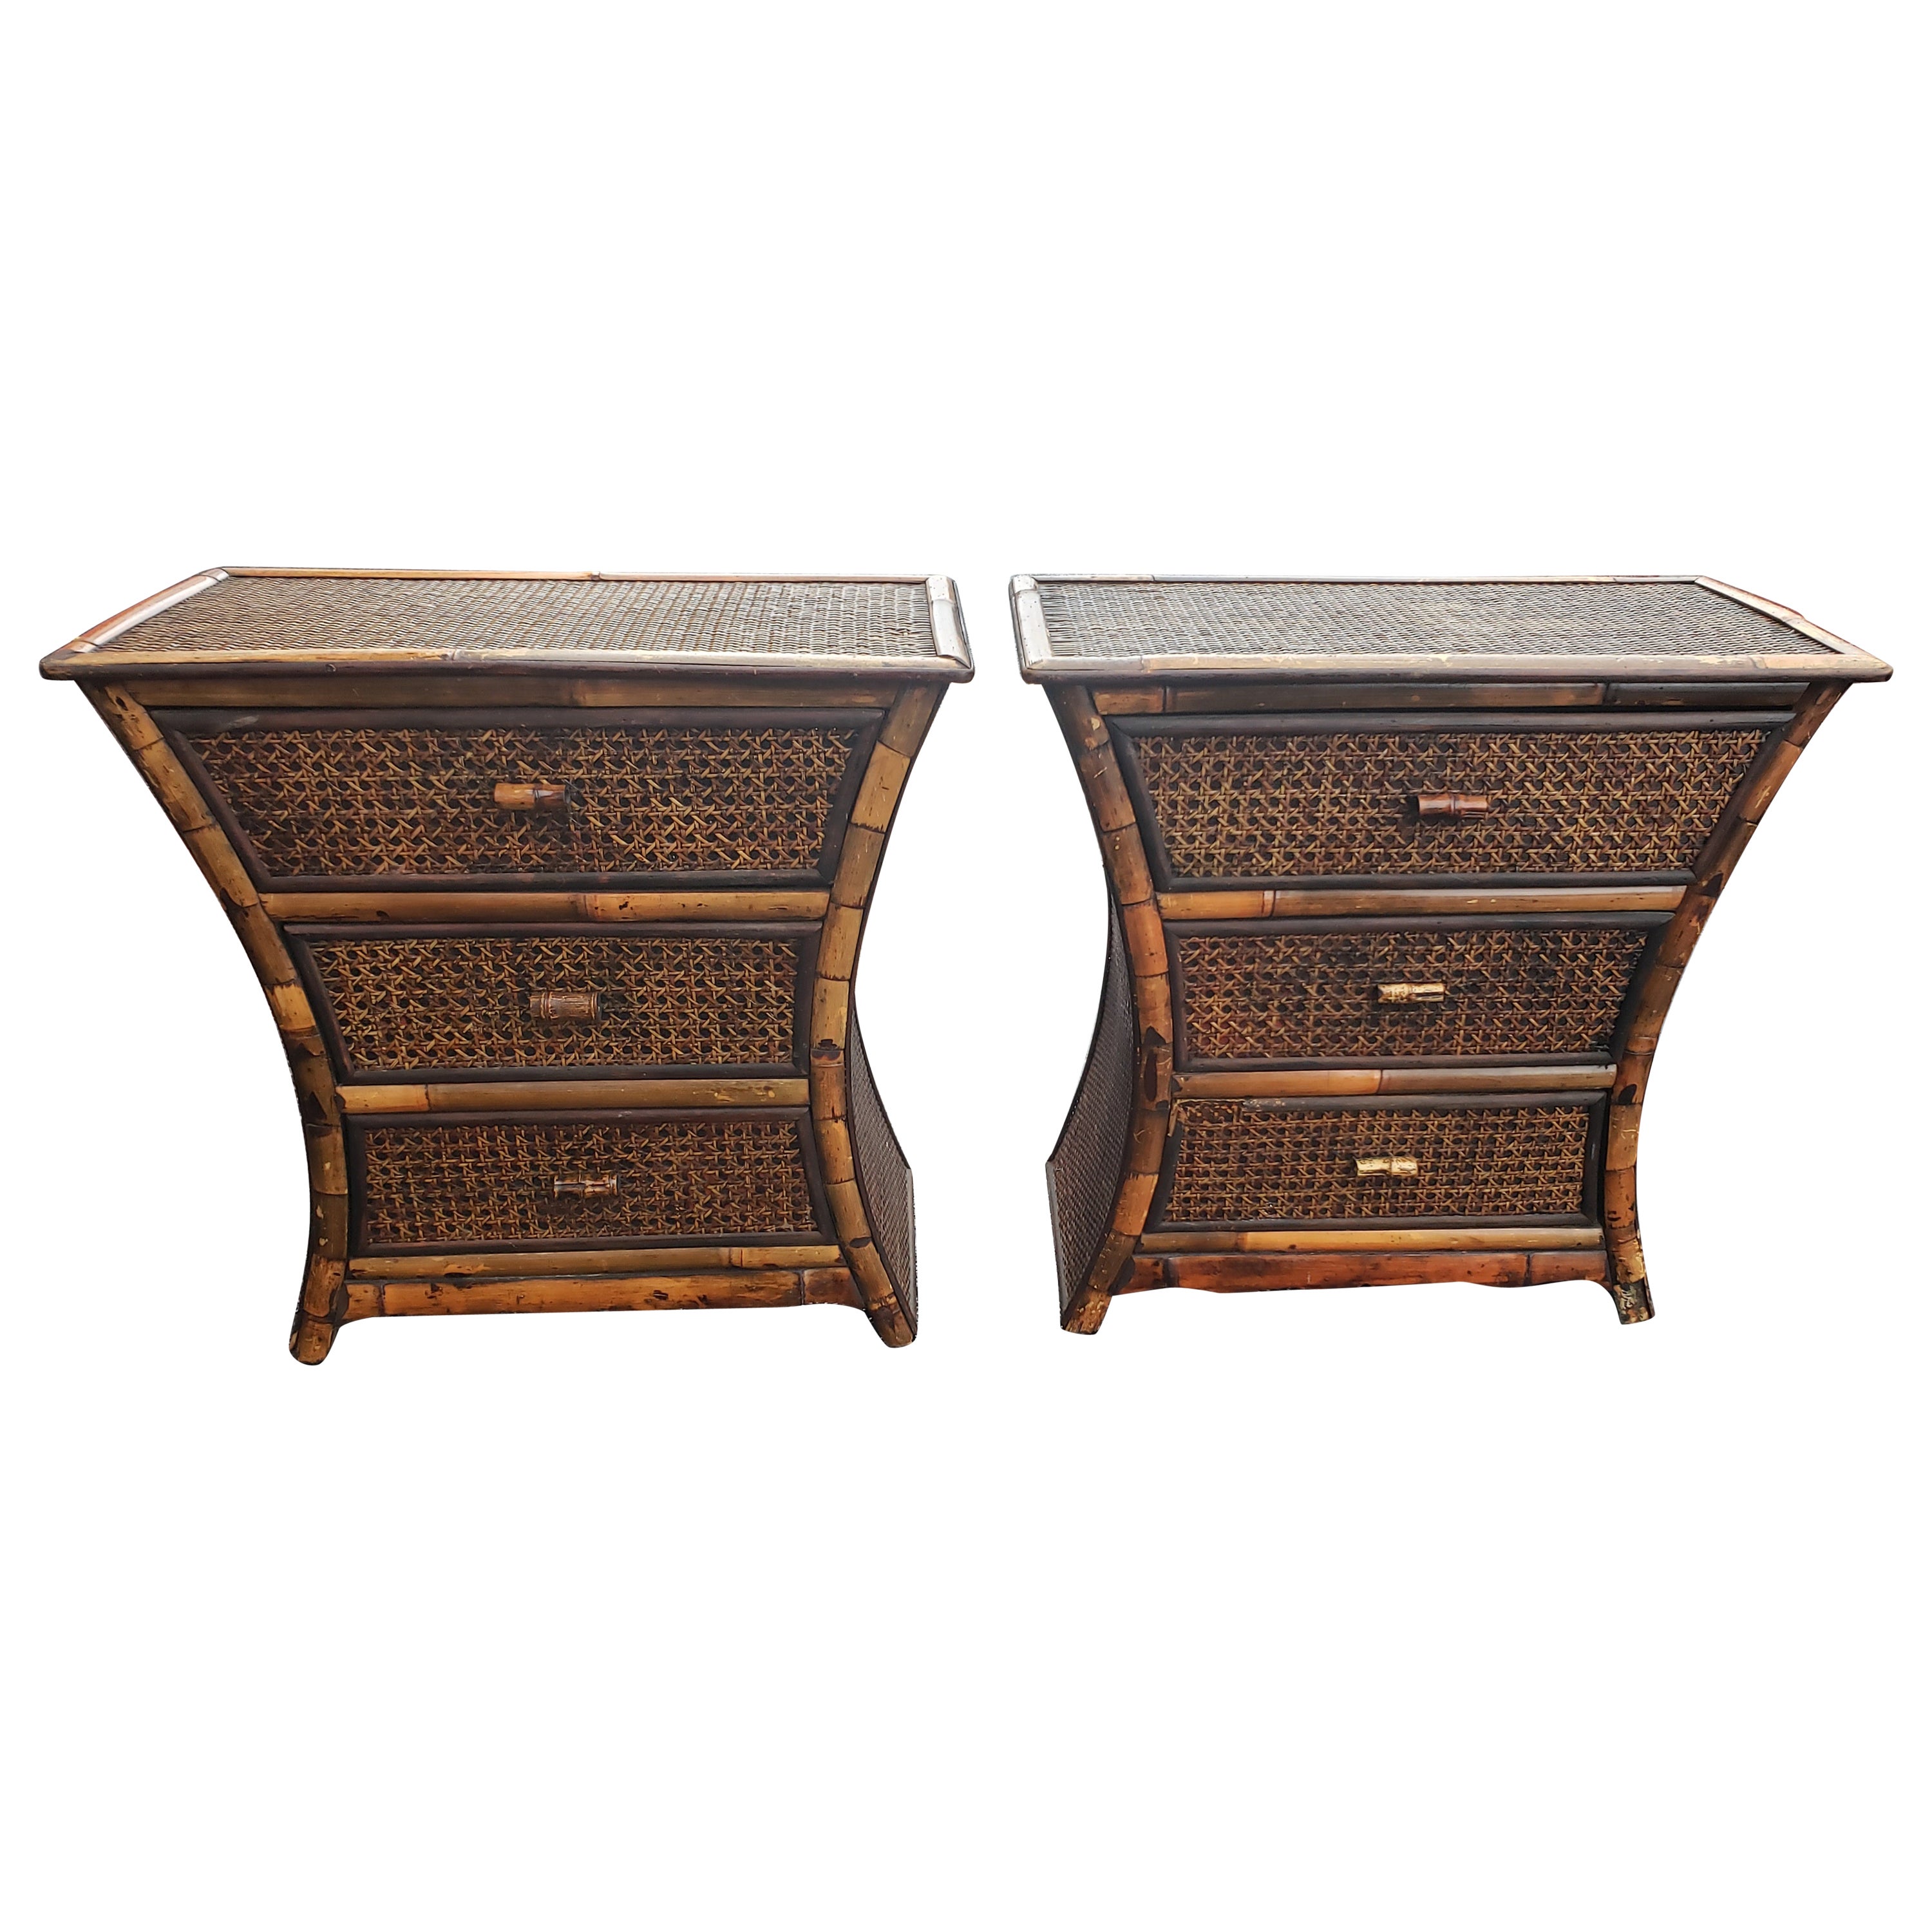 Vintage Bamboo and Wicker Side Tables Nightstands, circa 1940s, a Pair